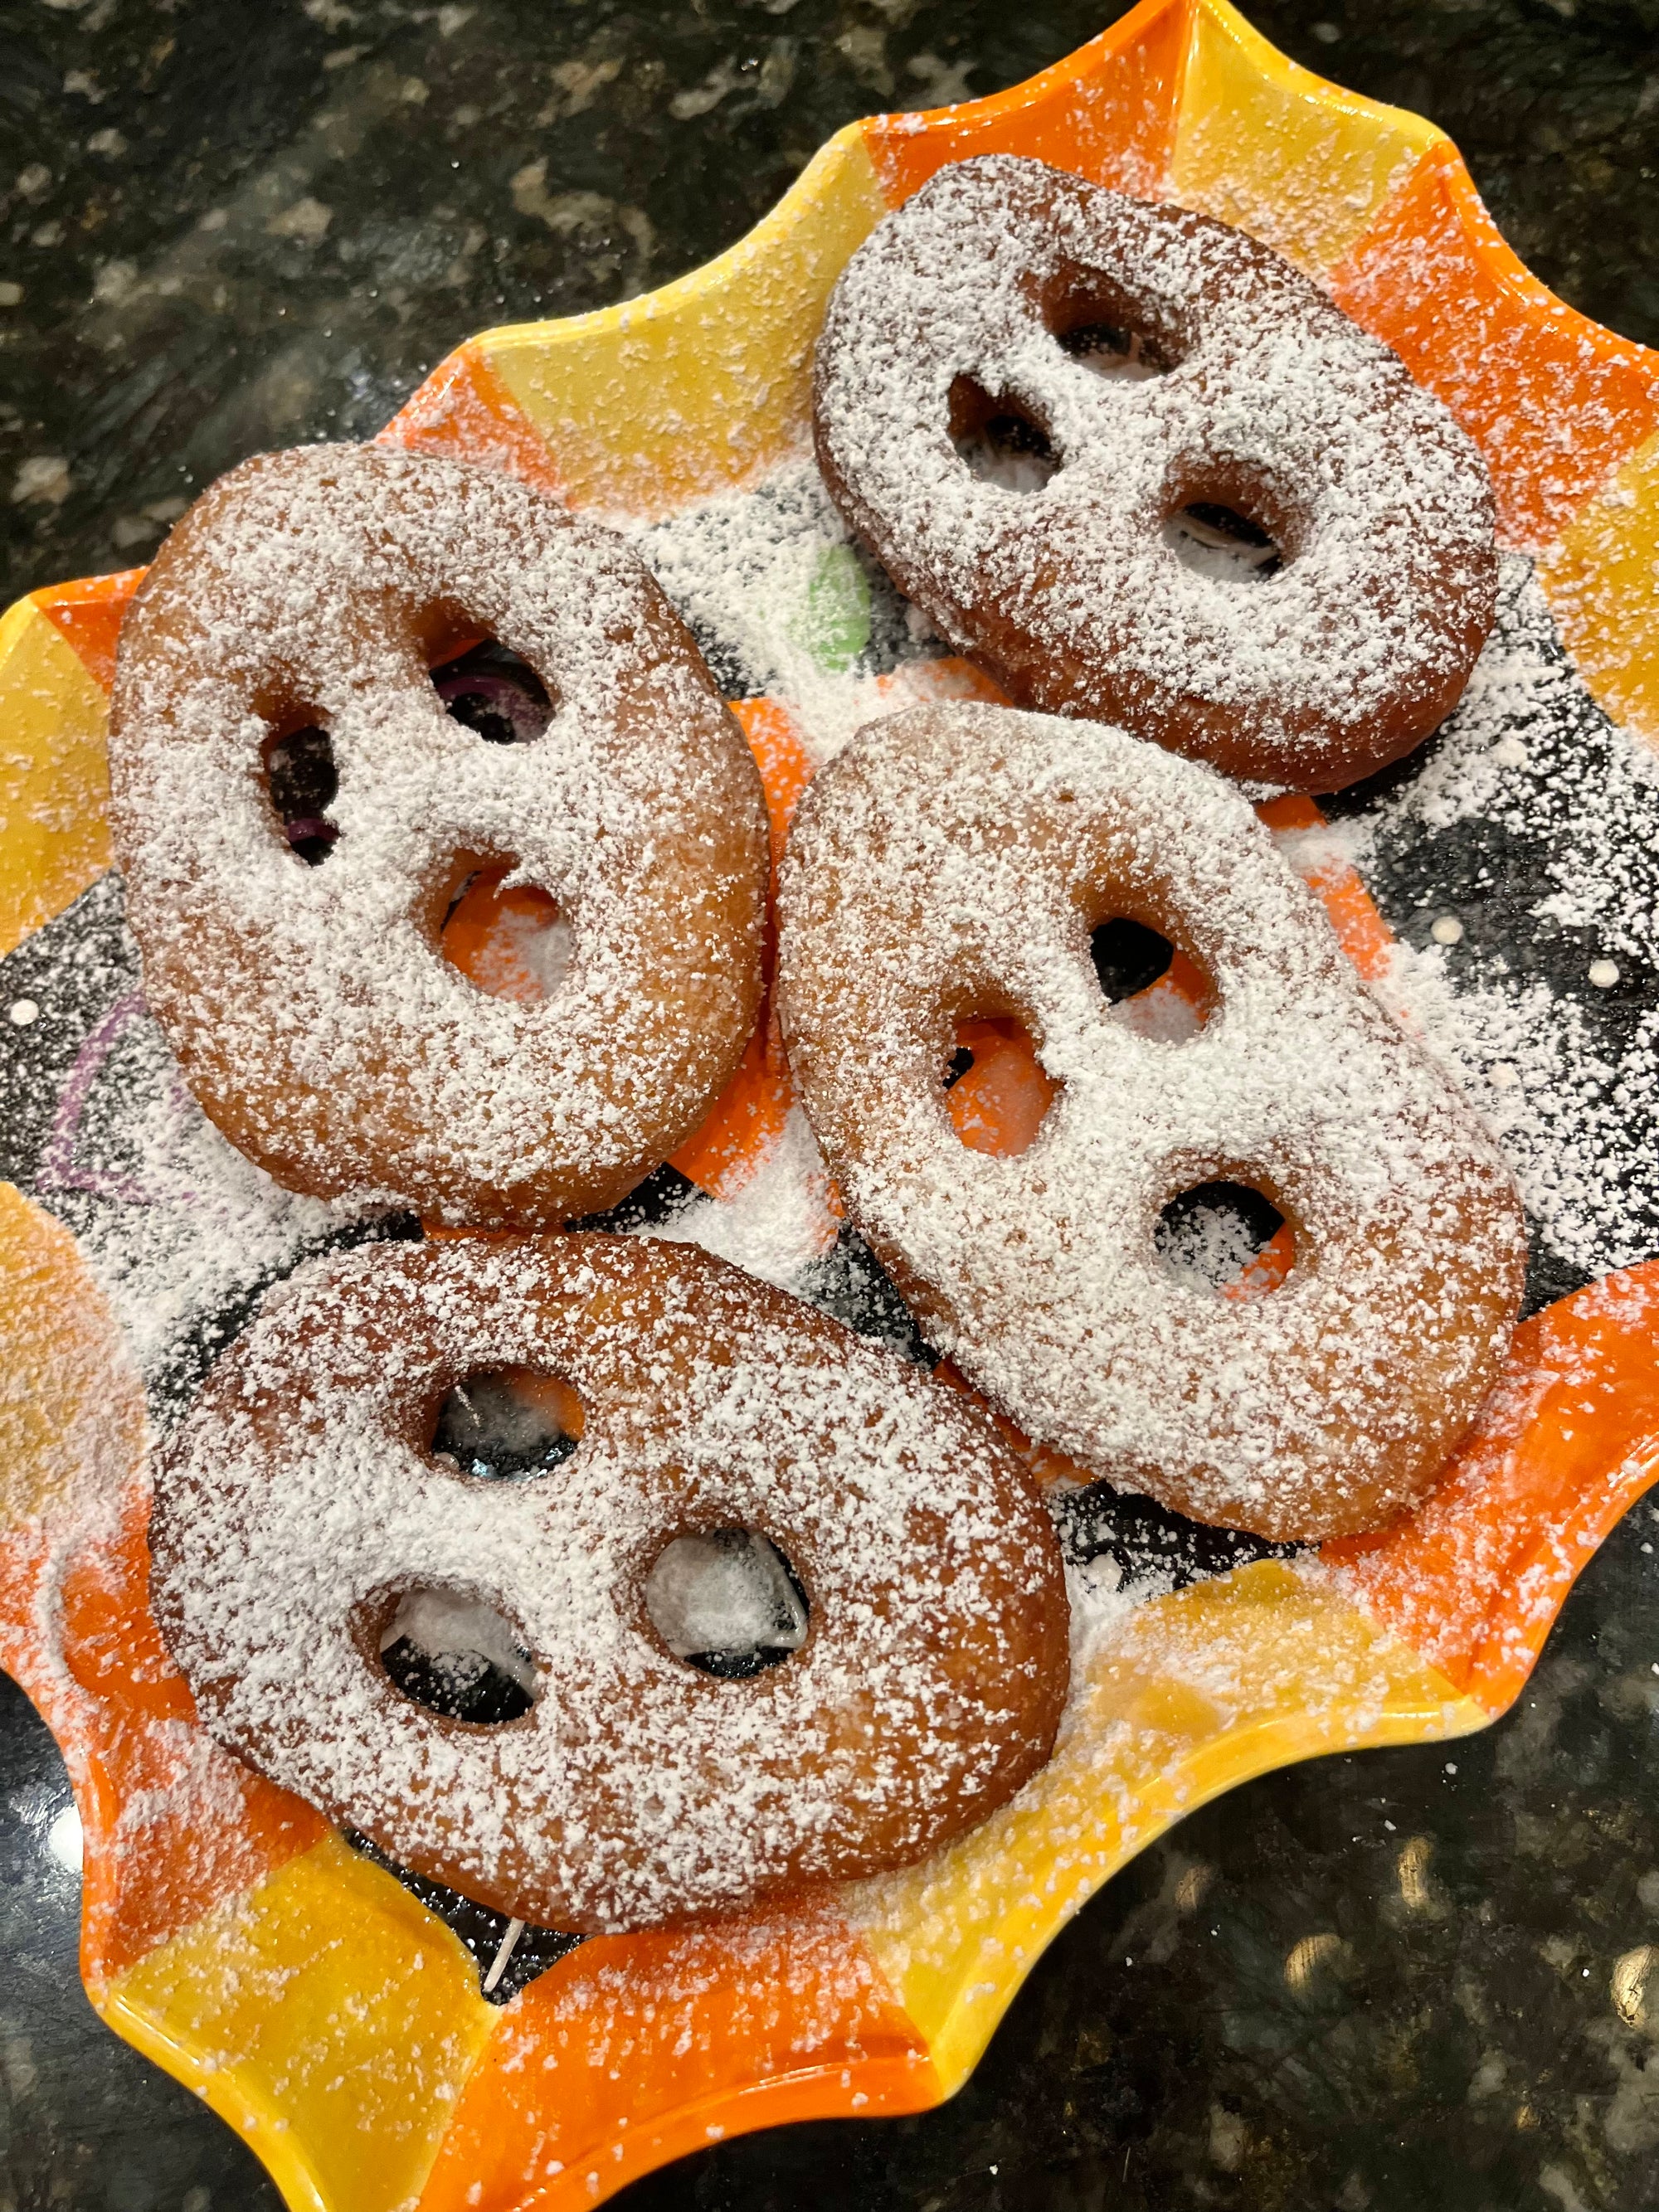 Fried Ghost Biscuits